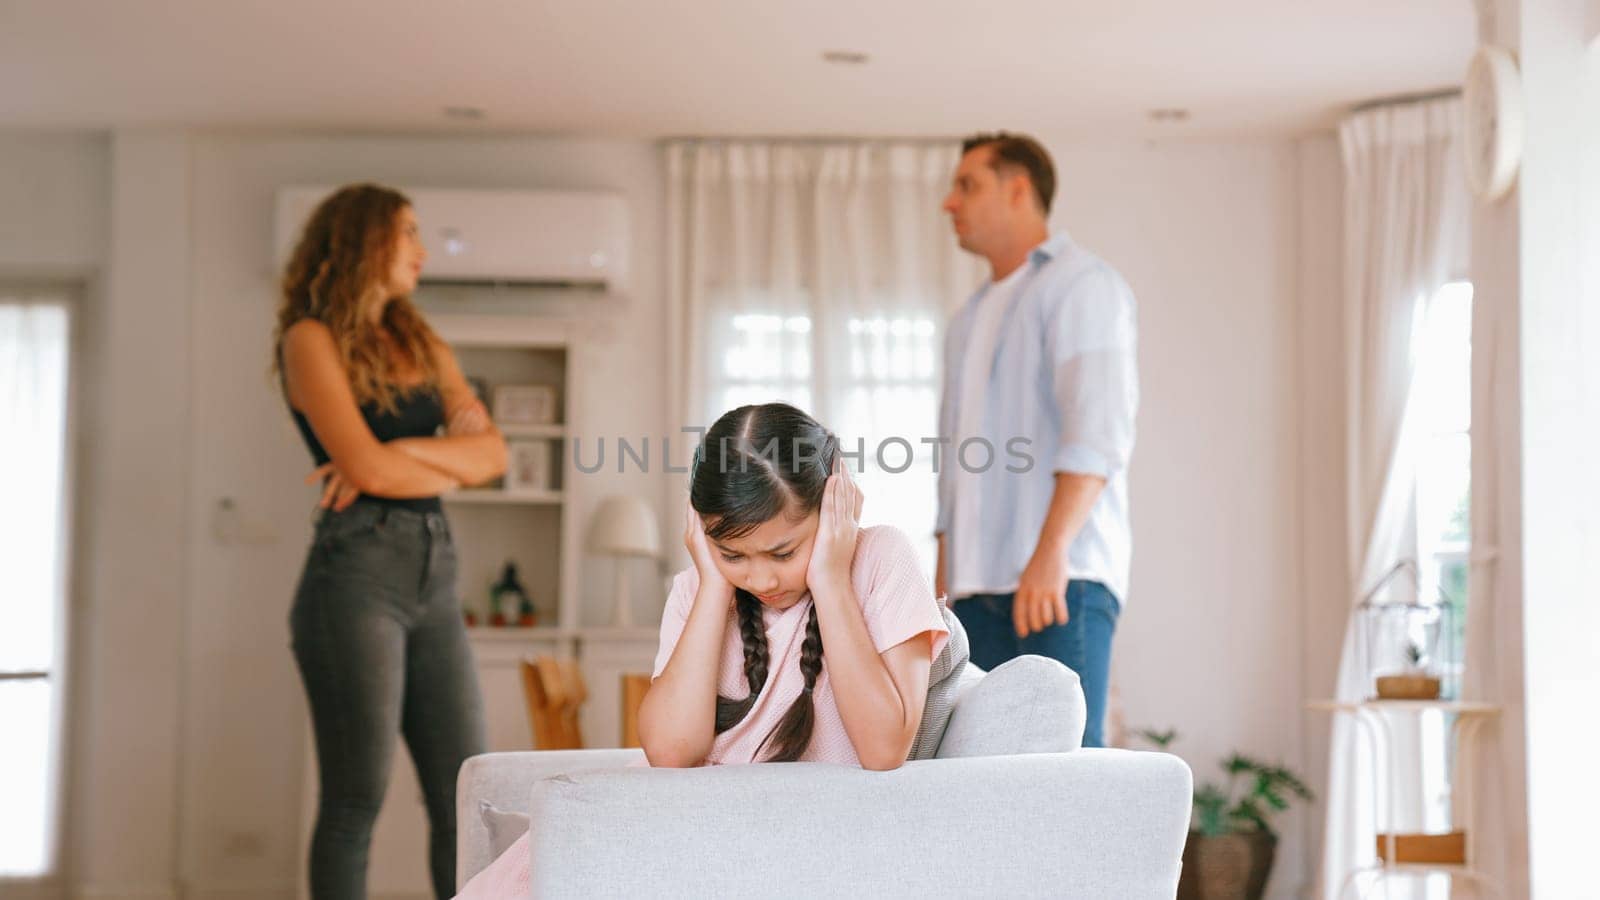 Annoyed and unhappy young girl sitting on sofa trapped in middle of tension by her parent argument in living room. Unhealthy domestic lifestyle and traumatic childhood develop to depression Synchronos